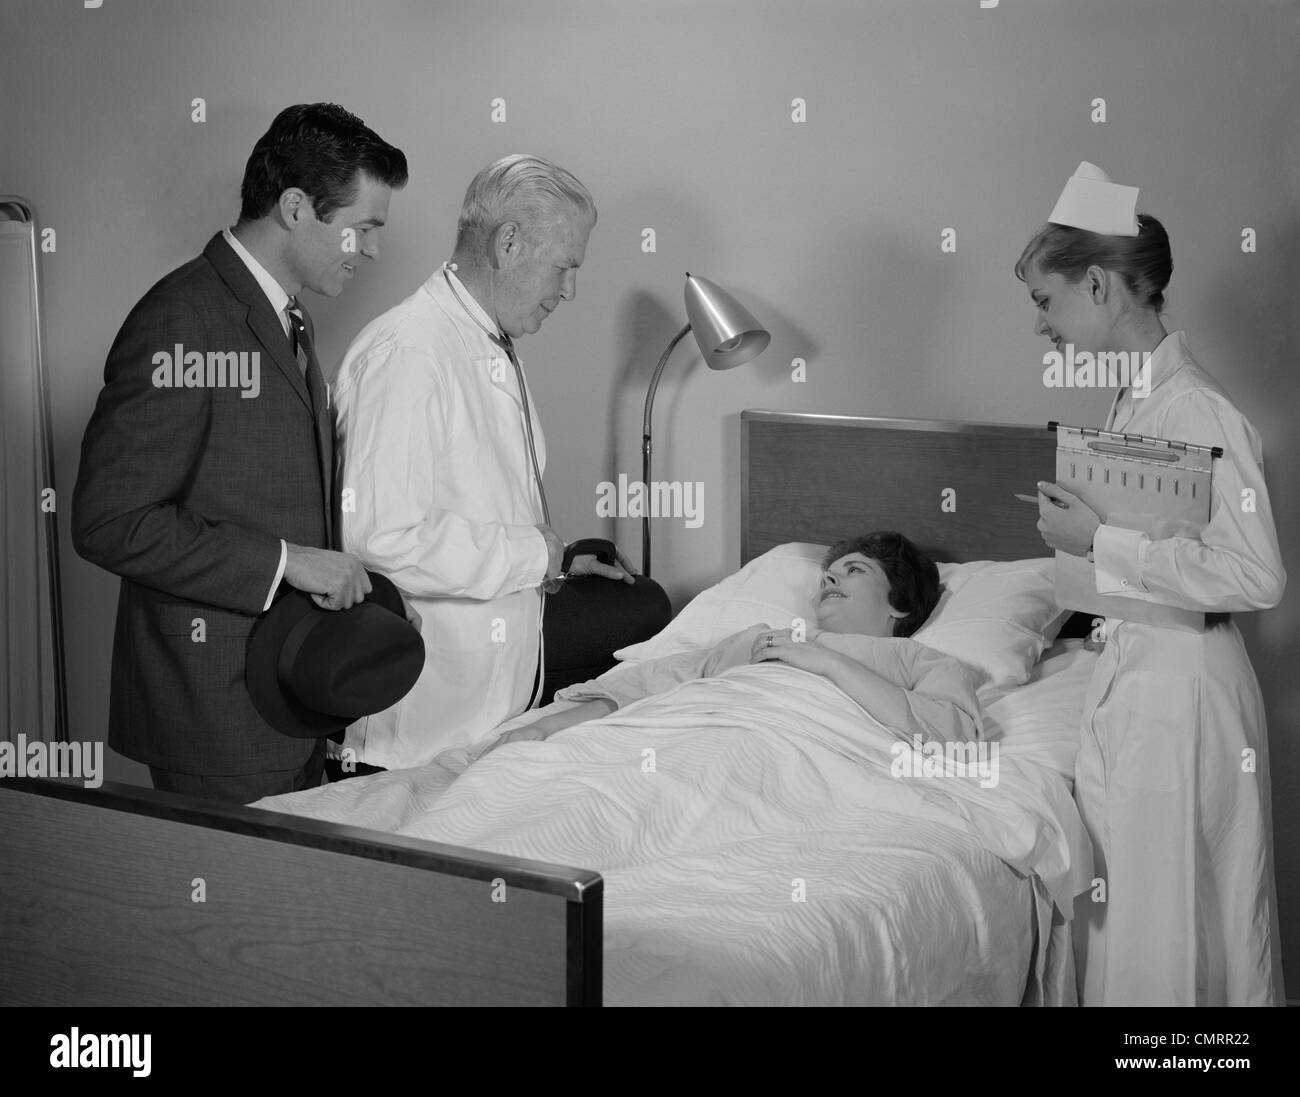 1960s DOCTOR NURSE HUSBAND TALKING WITH FEMALE PATIENT IN HOSPITAL BED Stock Photo